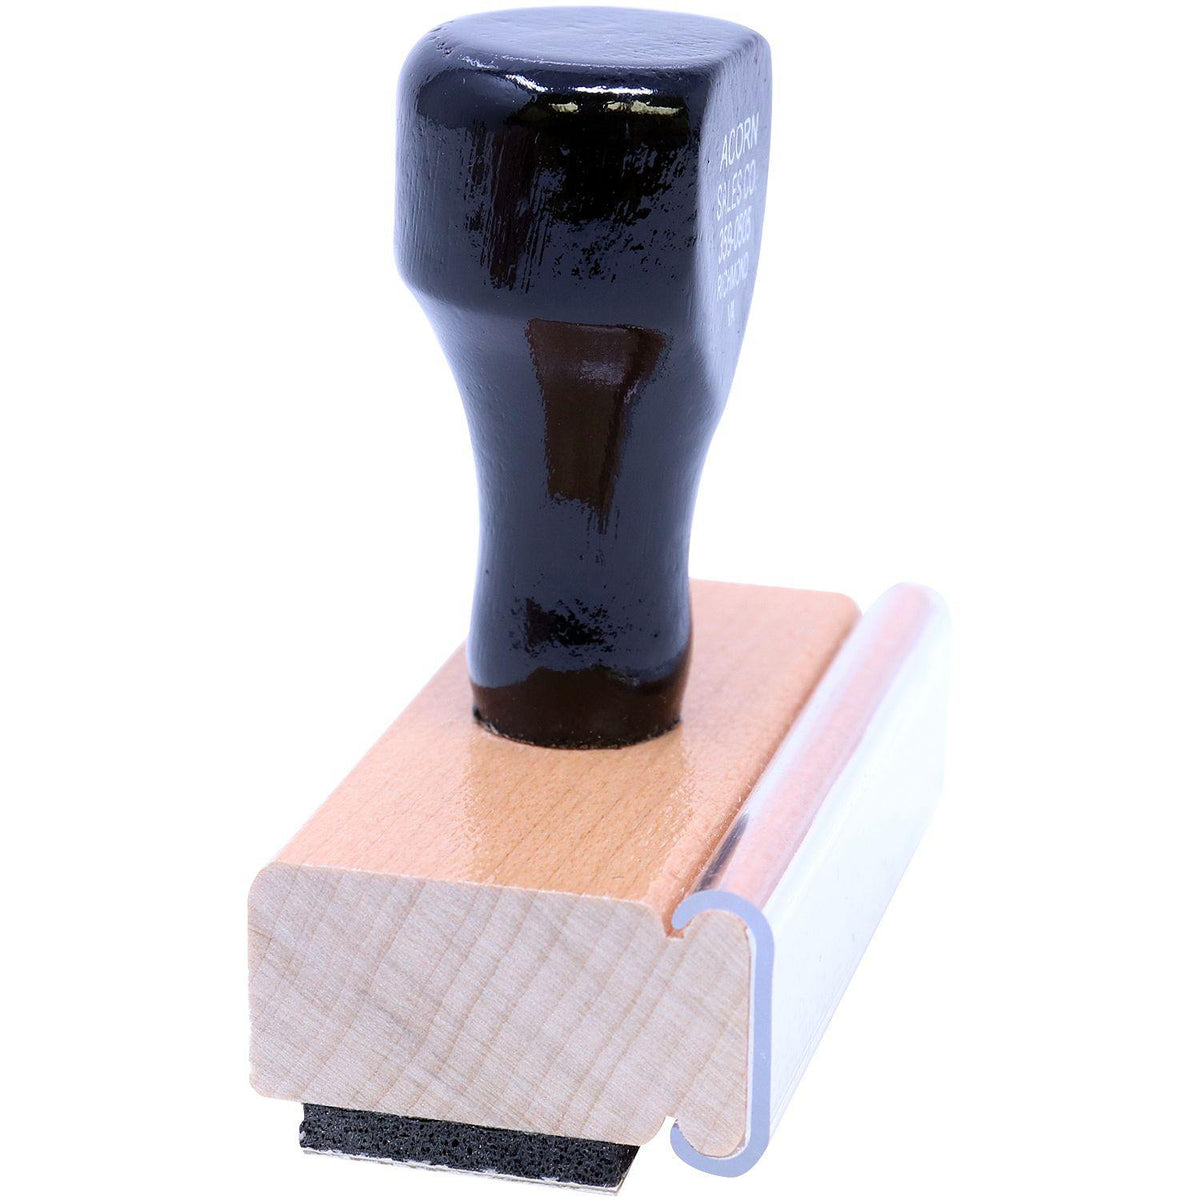 Narrow Font Insurance Verified Rubber Stamp - Engineer Seal Stamps - Brand_Acorn, Impression Size_Small, Stamp Type_Regular Stamp, Type of Use_Finance